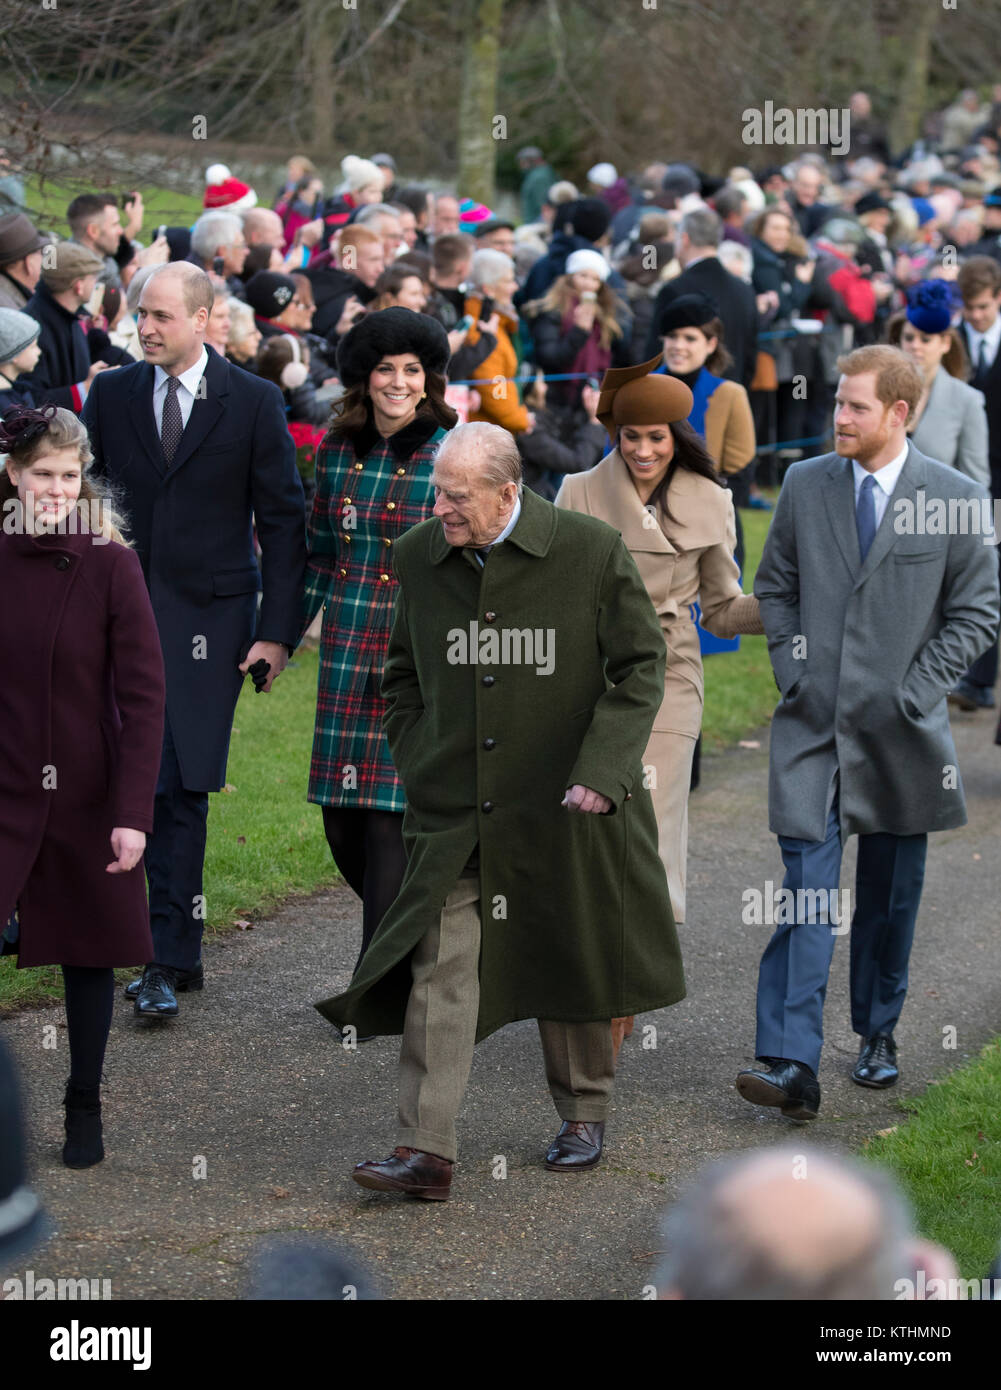 25th December 2017 Sandringham UK  Britain's Queen Elizabeth leads the British royal family as they attend a Christmas service at St Mary Magdalene church on the Sandringham Estate in Norfolk. Prince Harry's girlfriend American actress Meghan Markle attended the service having been invited by the Queen to join the family Christmas festivities. Stock Photo